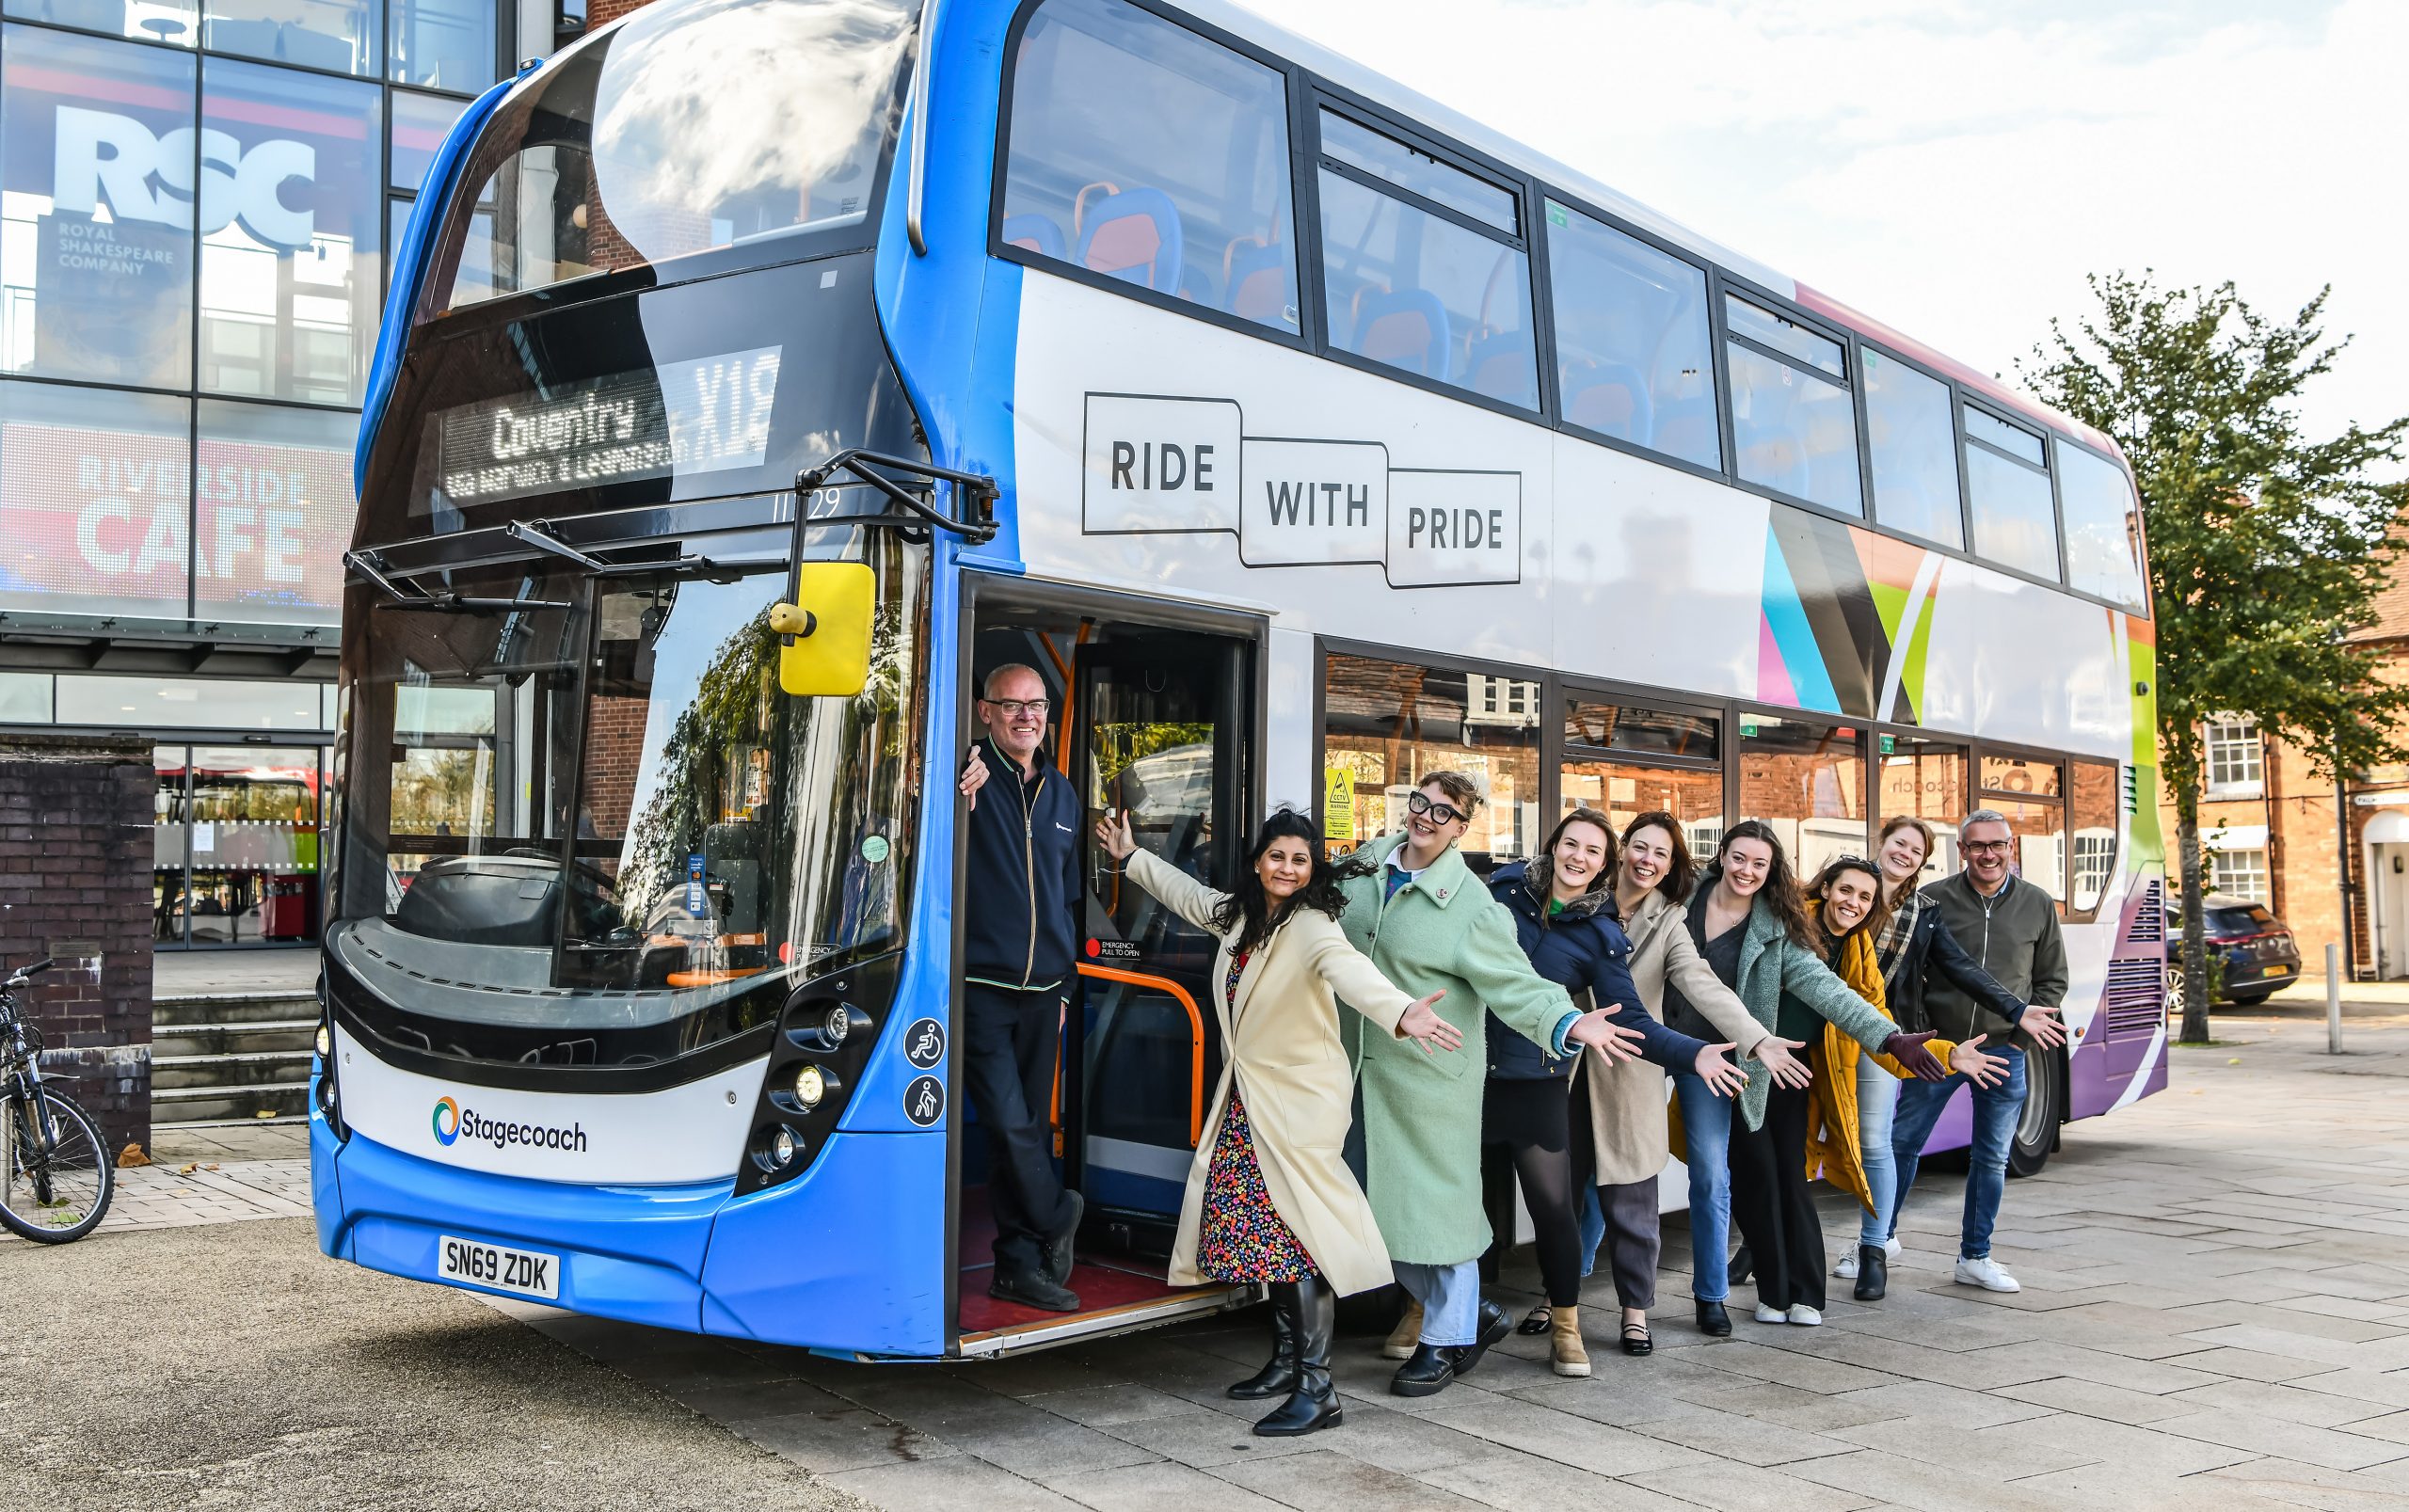 New Stagecoach Service From Stratford